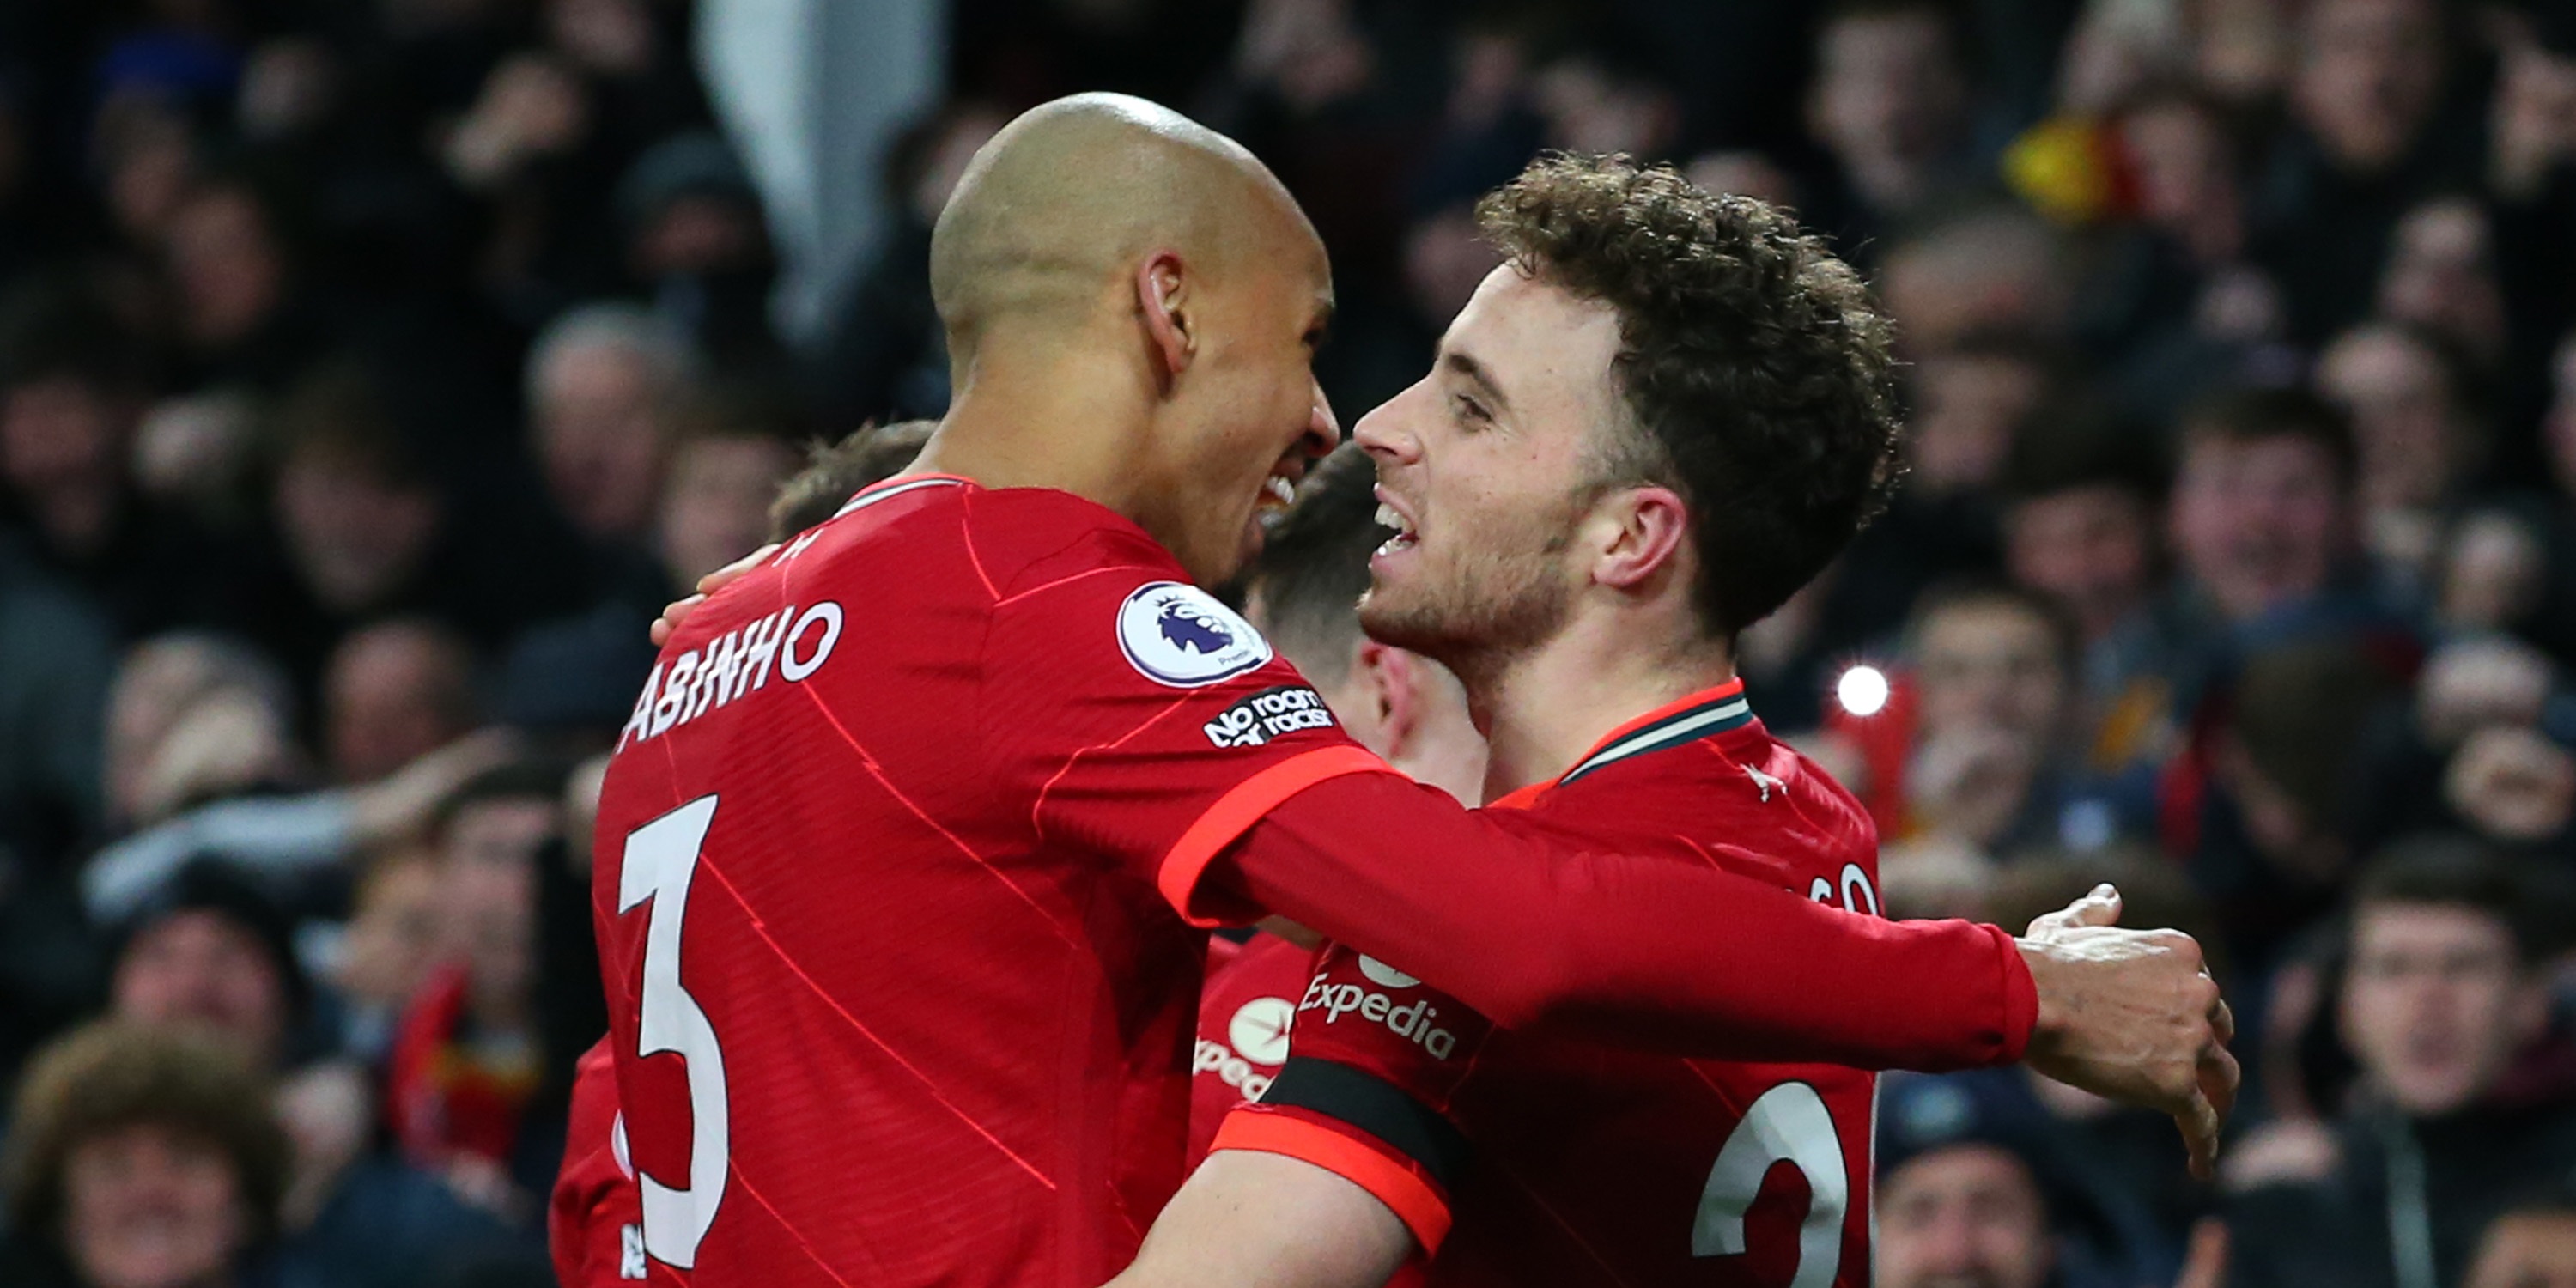 Danny Mills labels one of Jurgen Klopp’s Liverpool stars as ‘critical’ heading into the massive clash with Manchester City